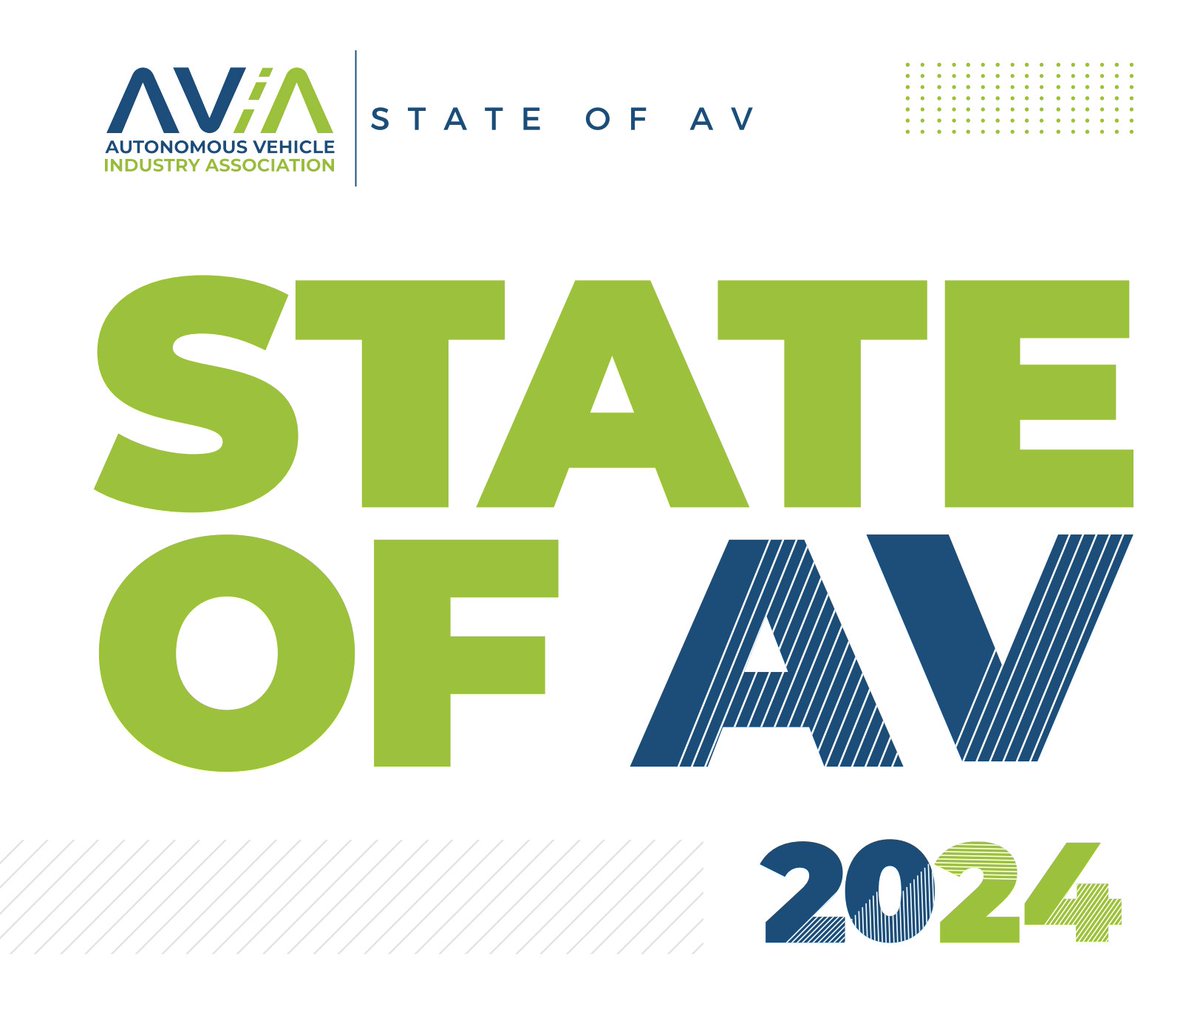 Autonomous vehicles are revolutionizing the way we get around, making our roads safer and creating new opportunities. We’re excited to be featured in @theavindustry's first-ever #StateofAV report, showcasing the technology’s progress. Learn more: theavindustry.org/resources/stat….